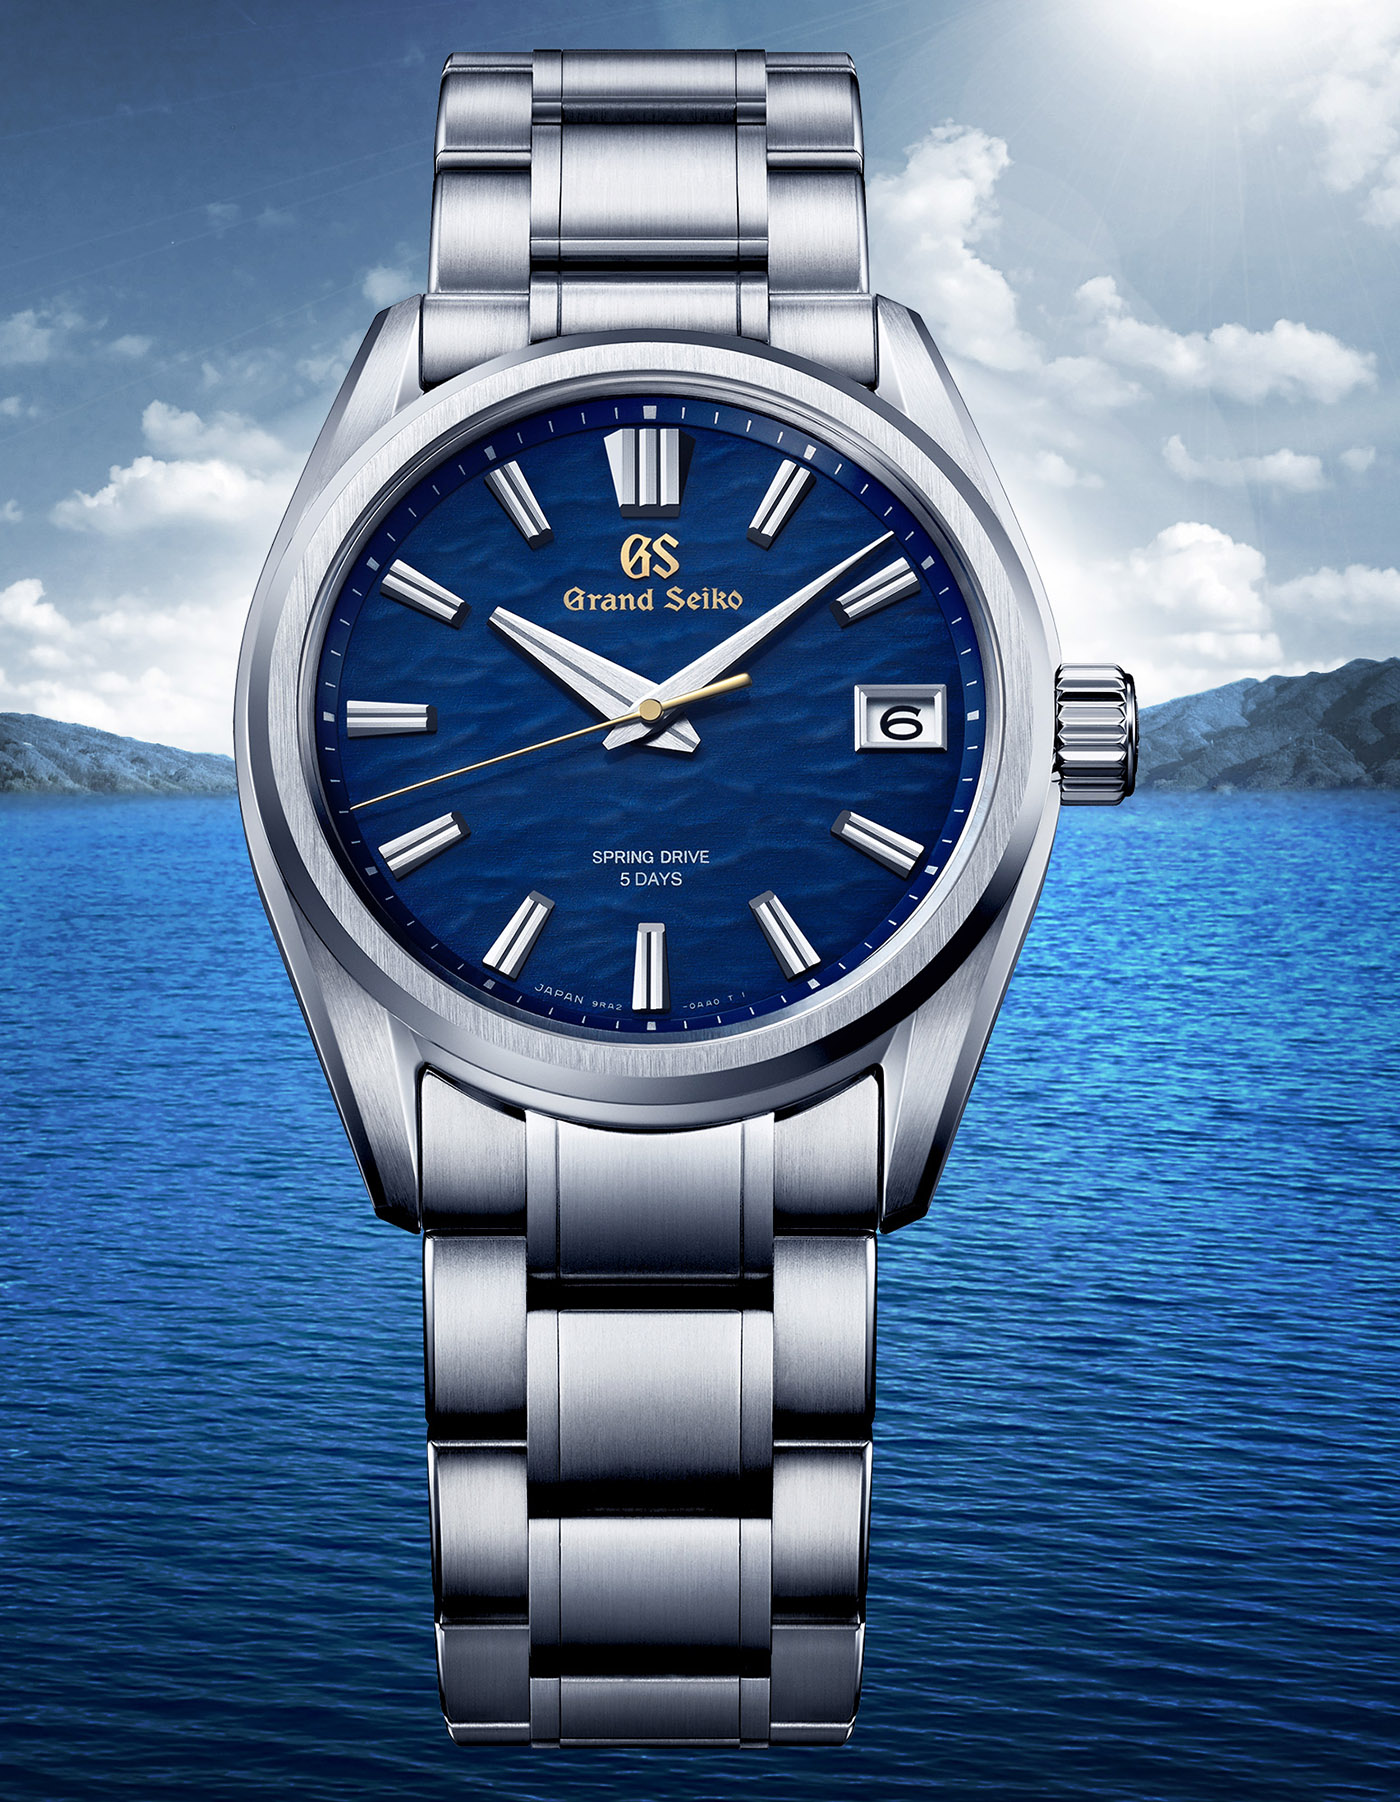 Grand Seiko Unveils Limited Edition SLGA007 And SLGA008 Spring Drive  Watches | aBlogtoWatch